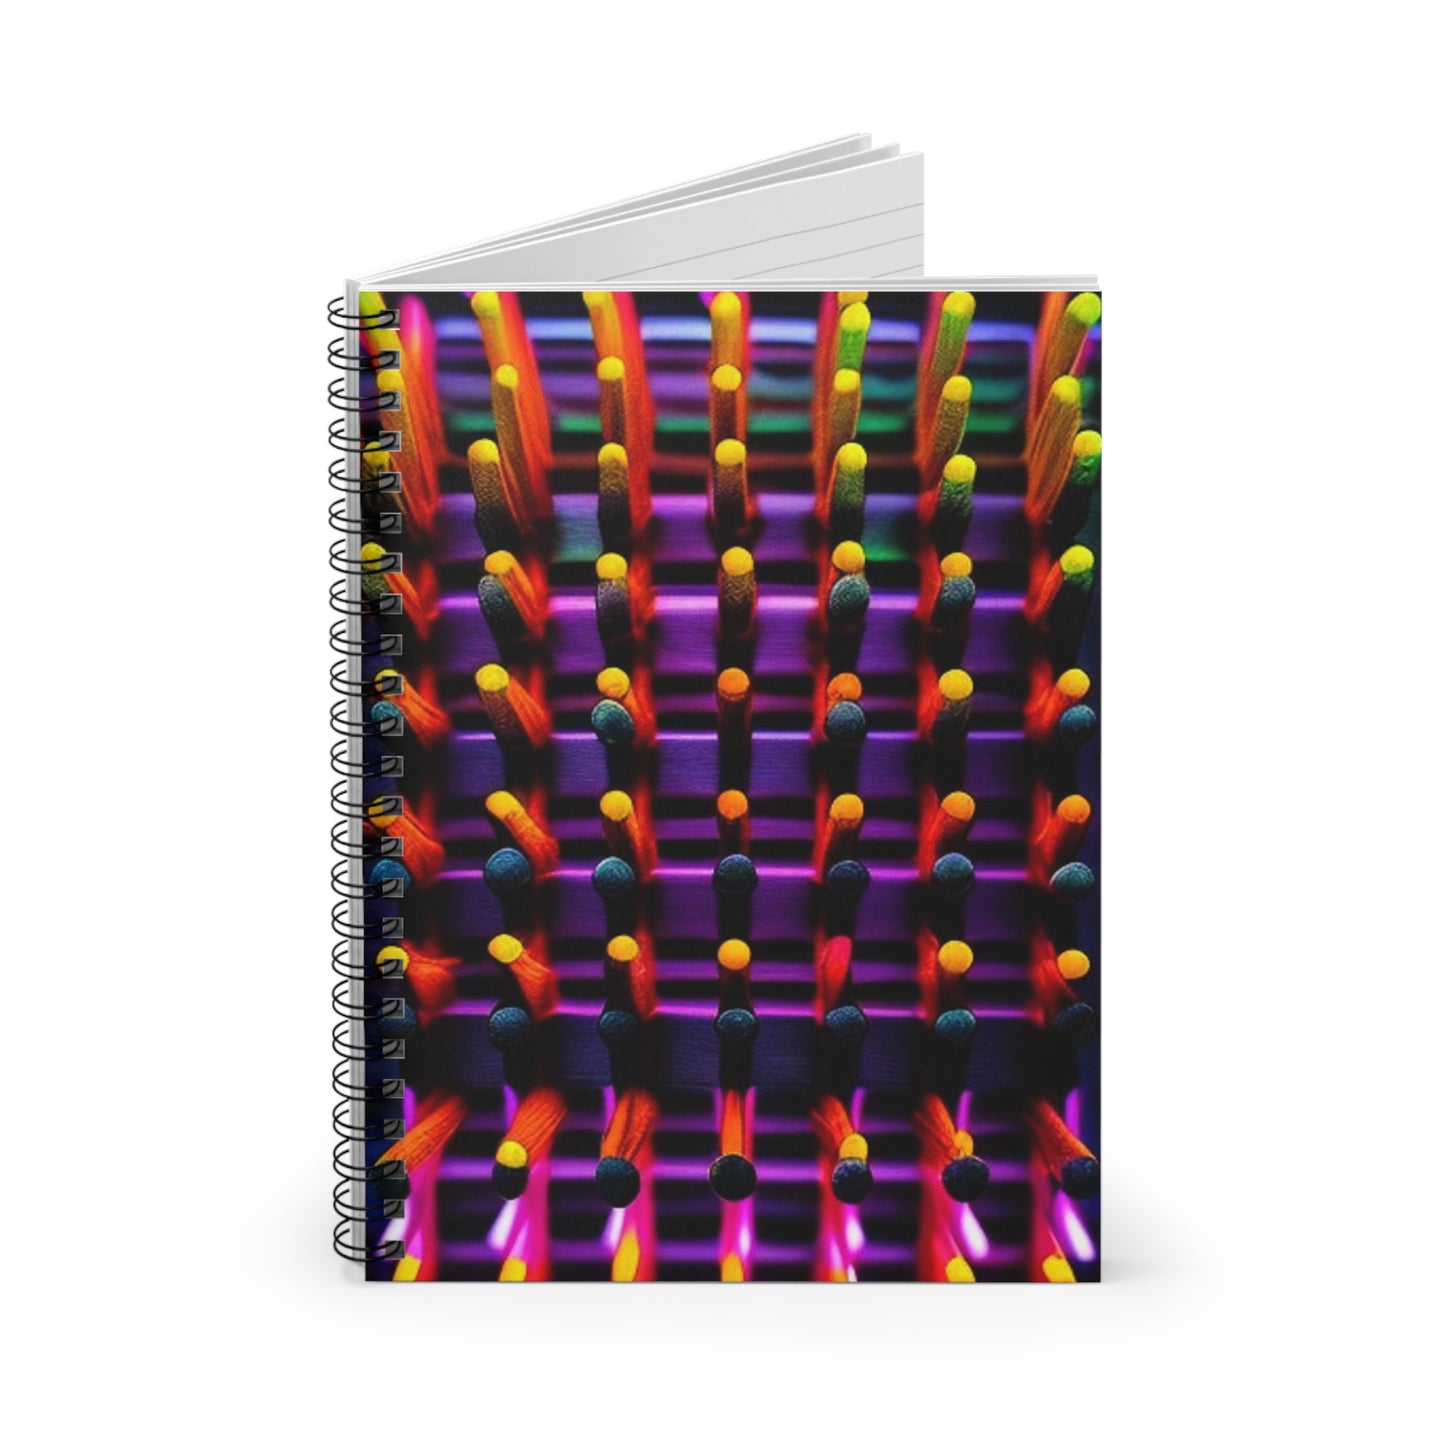 Spiral Notebook - Ruled Line Macro Cactus neon square 2